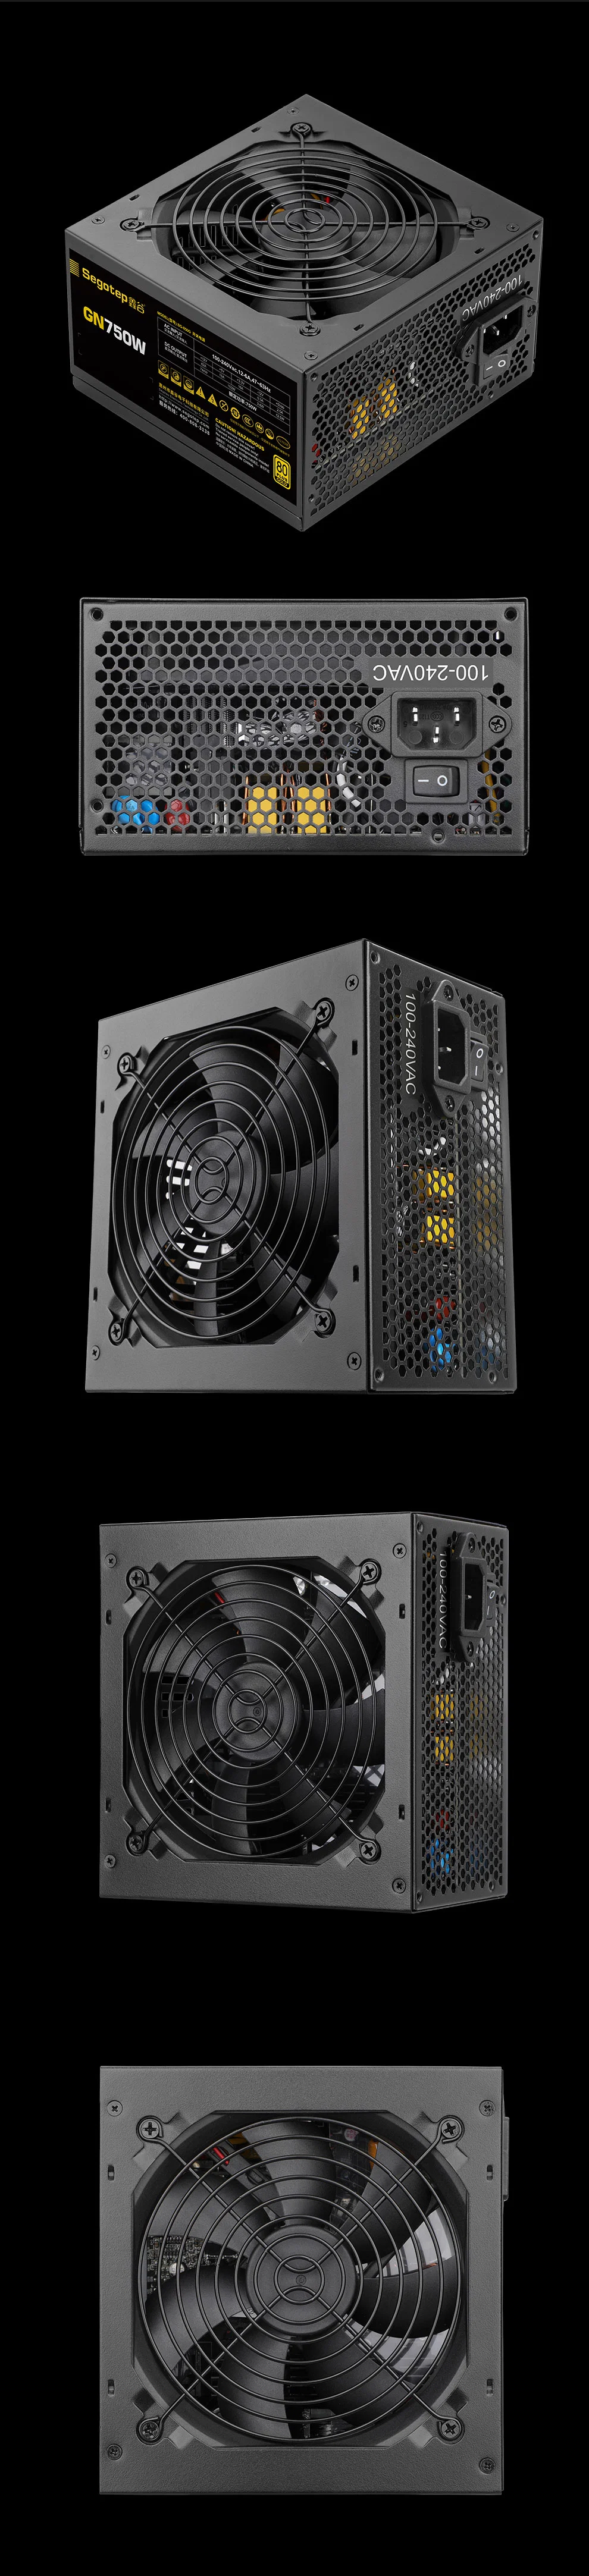 Export to -London-Sydney-with Full Protections-750W 650W 850W with 80 Plus Gold Computer Power Supply